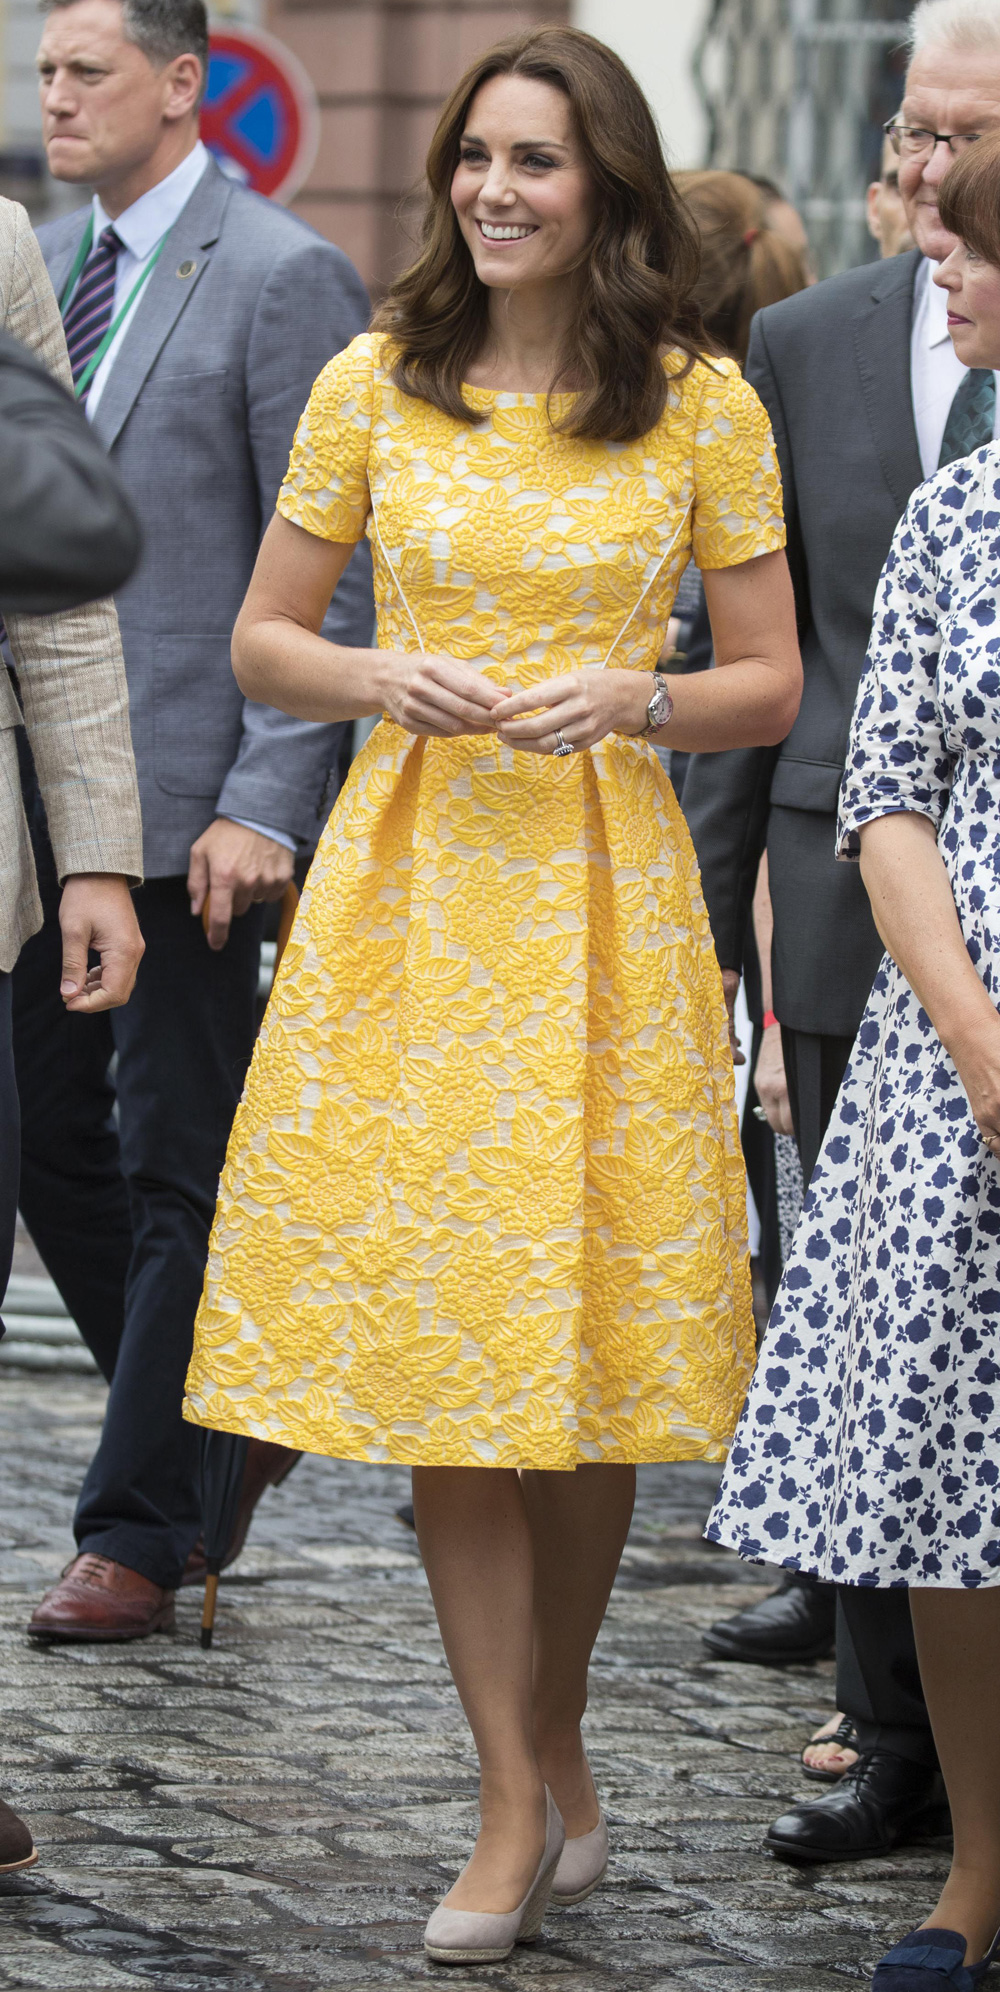 https://www.abouther.com/sites/default/files/2017/07/25/kate_middleton_in_yellow_lace_dress_for_traditional_market_visit_in_heidelberg.jpg